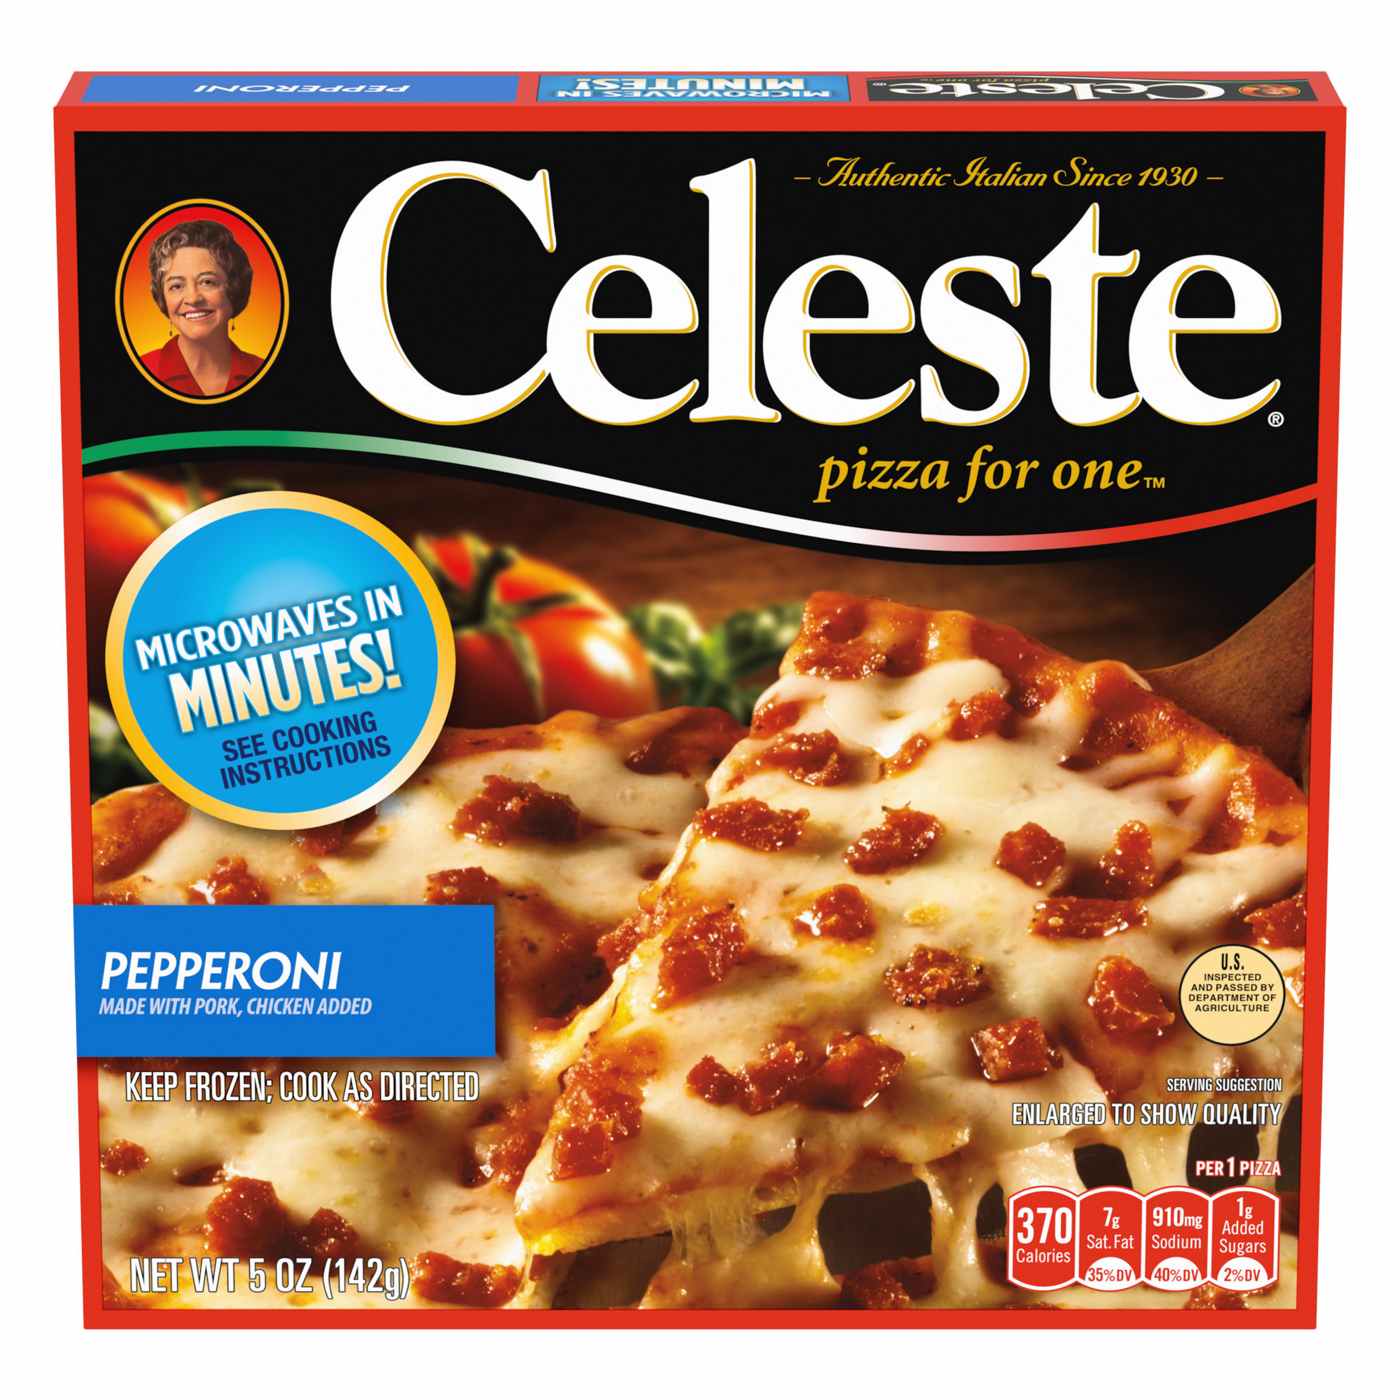 Celeste Personal Size Microwavable Frozen Pizza - Pepperoni; image 1 of 2